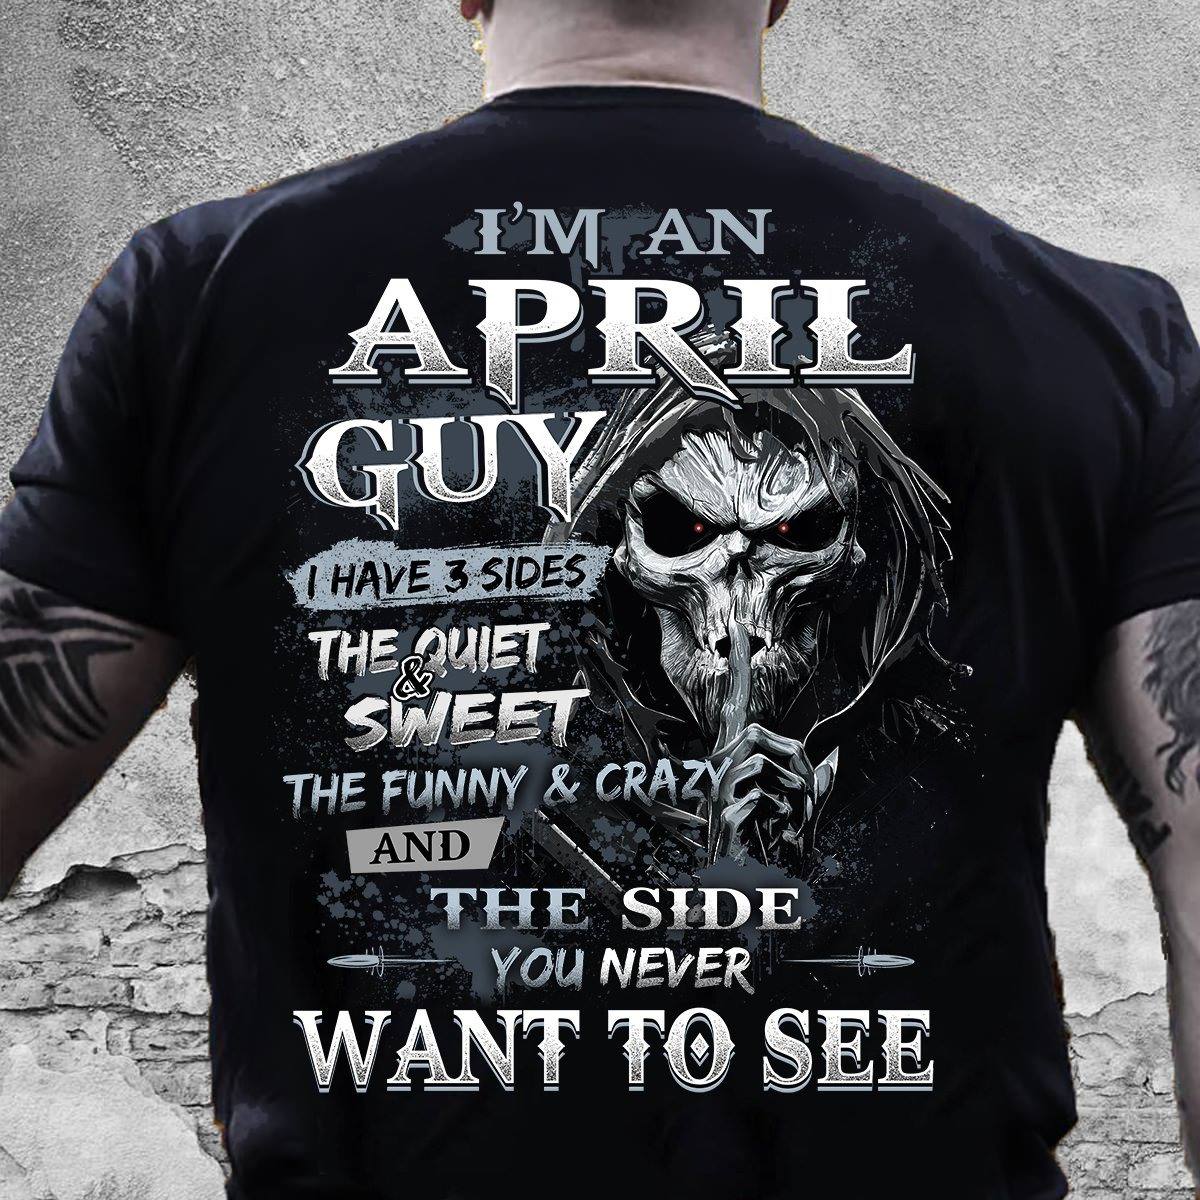 I'm an April guy I have 3 sides - Quiet sweet funny crazy - Angel of death